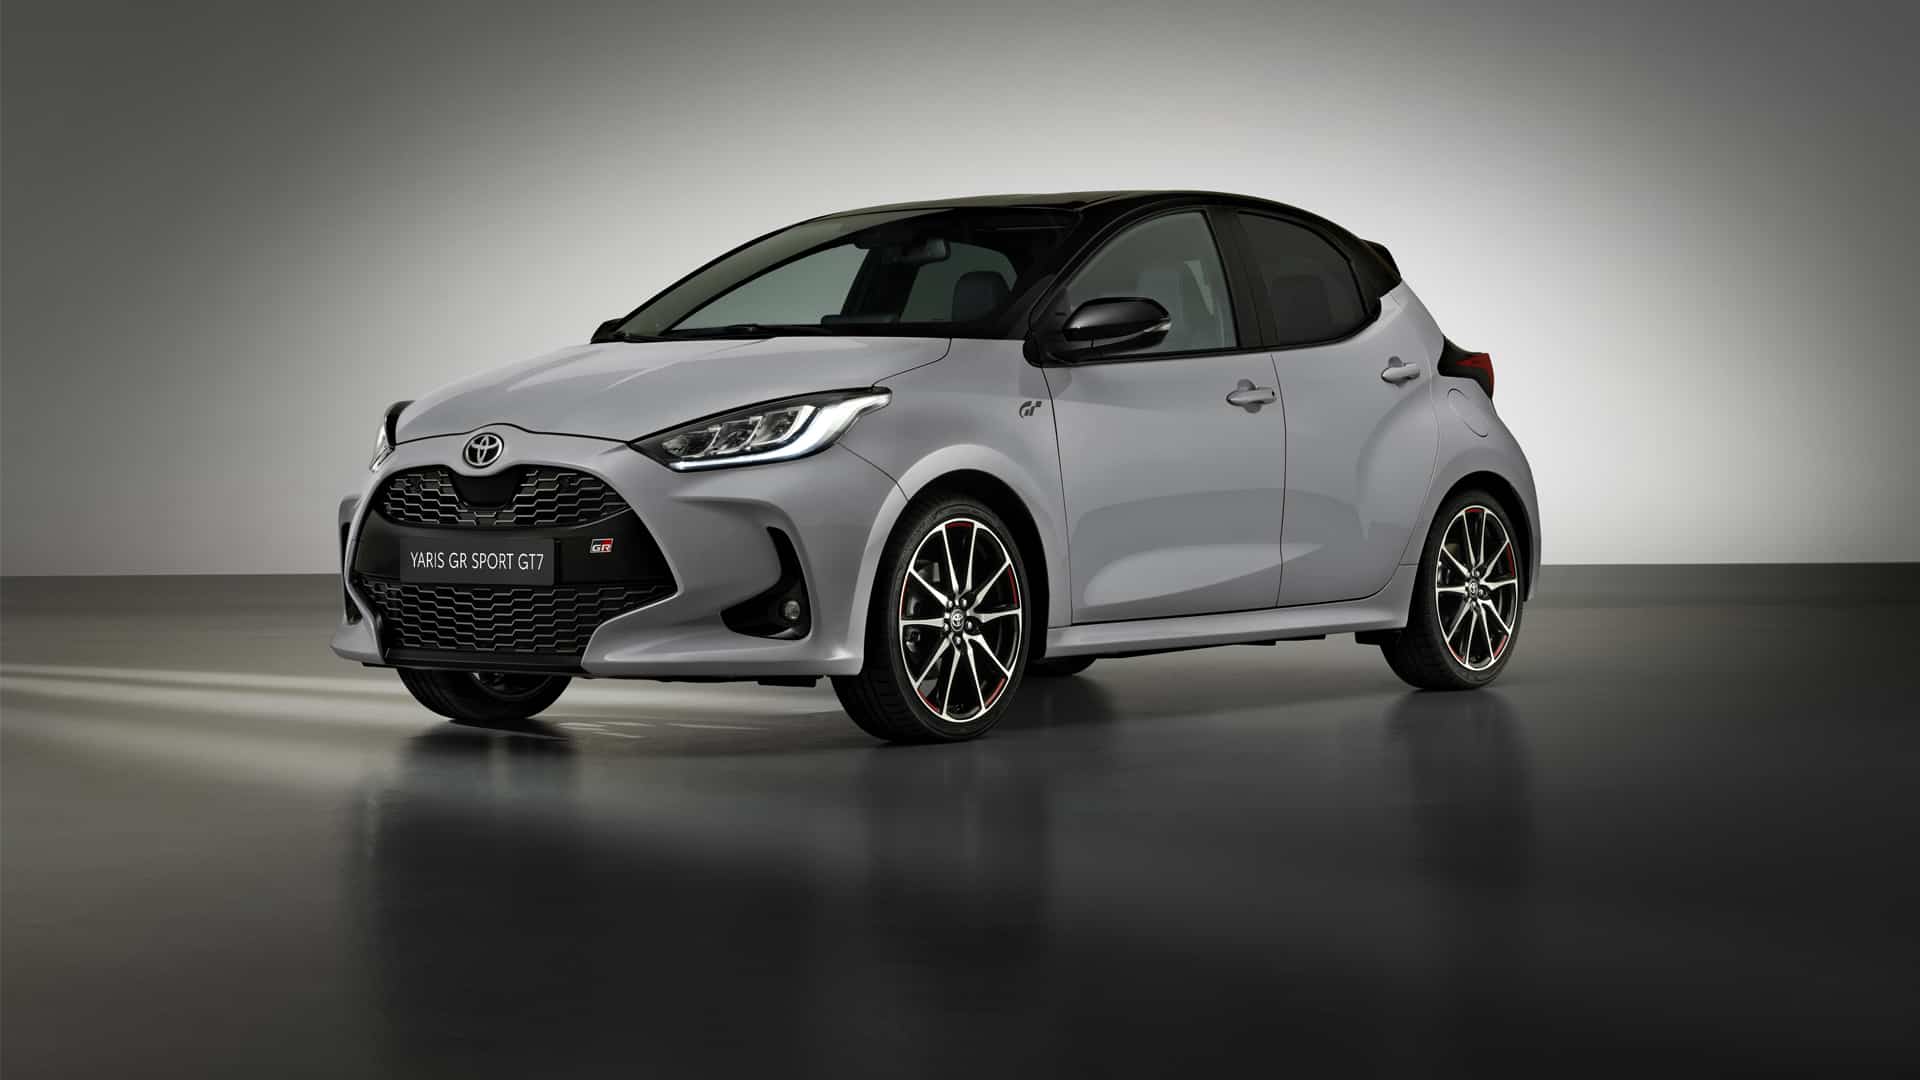 Limited edition Toyota Yaris Gran Turismo 7 includes a PS5, partnership extended